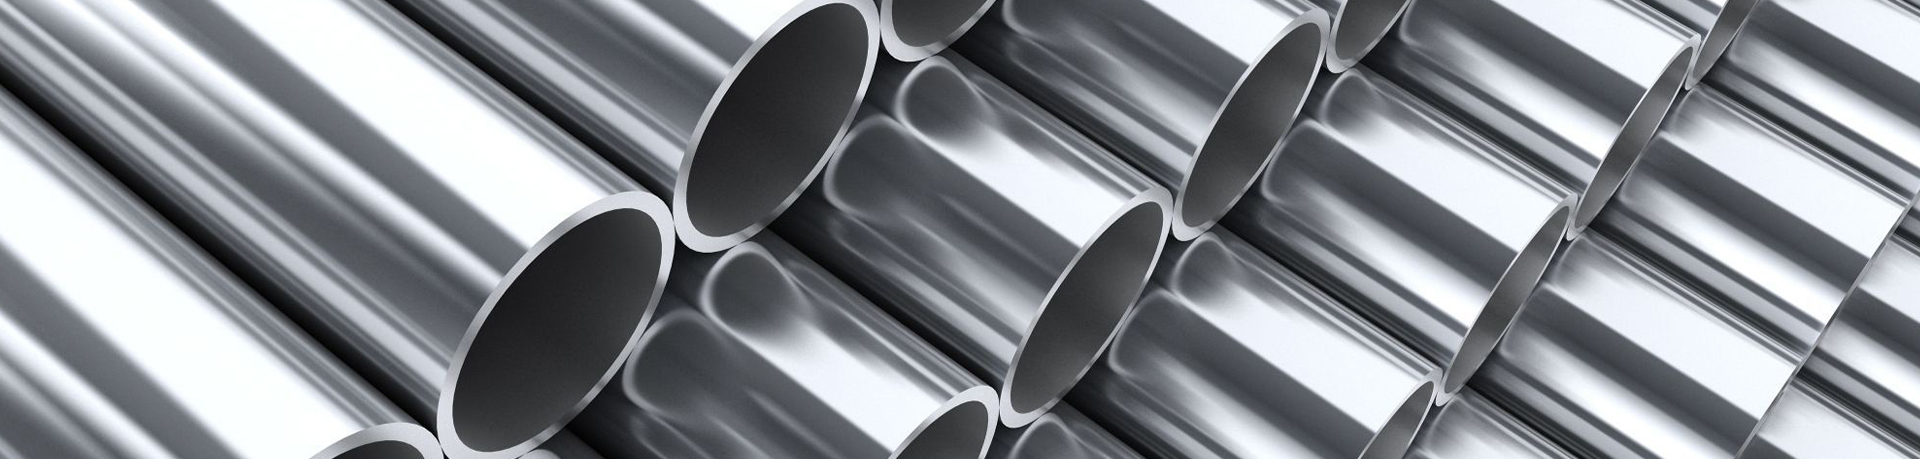 Stainless Steel Weld Pipe